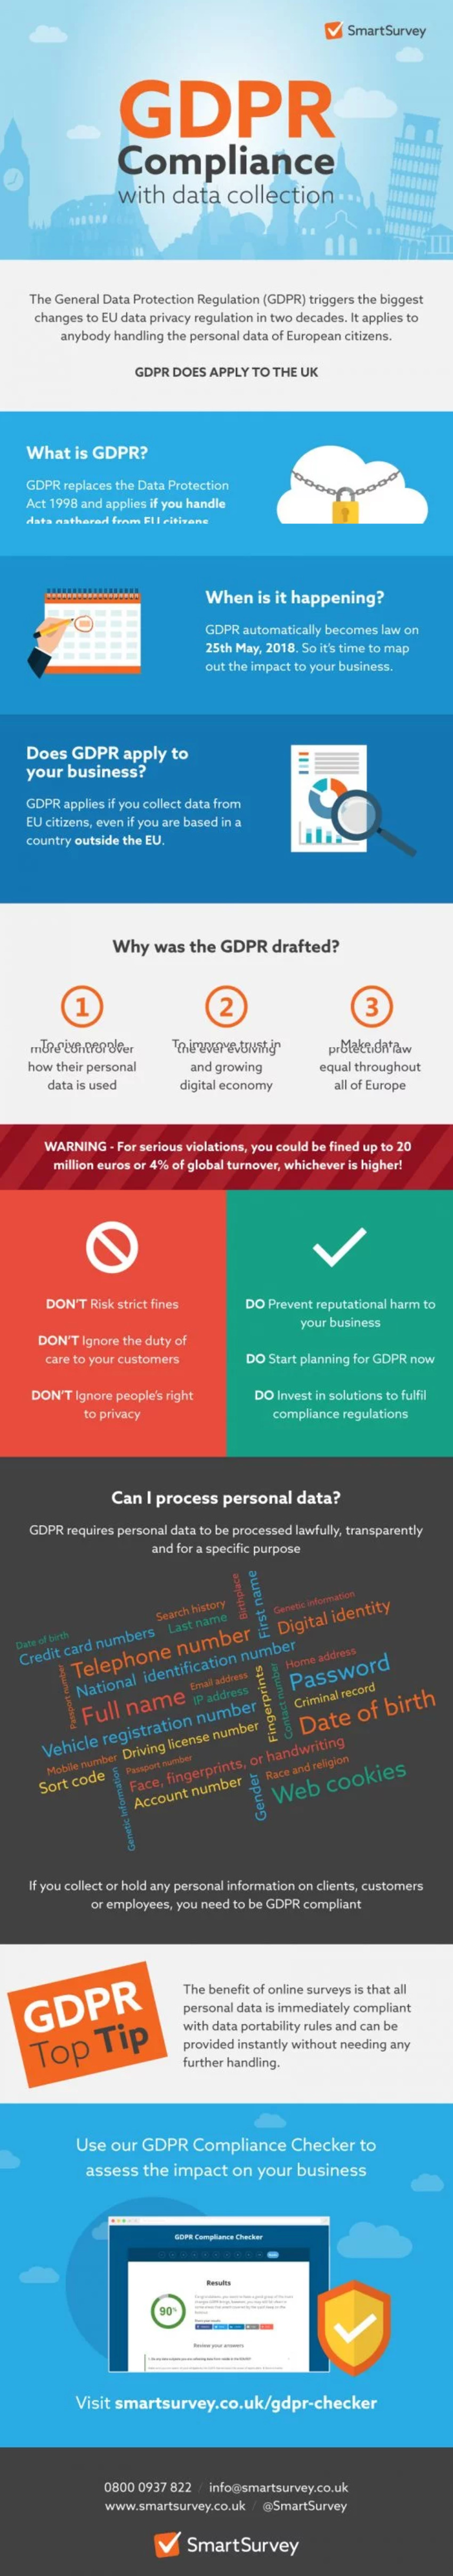 GDPR Compliance – What this means for Data Collection [Infographic] - Smart Insights | The MarTech Digest | Scoop.it